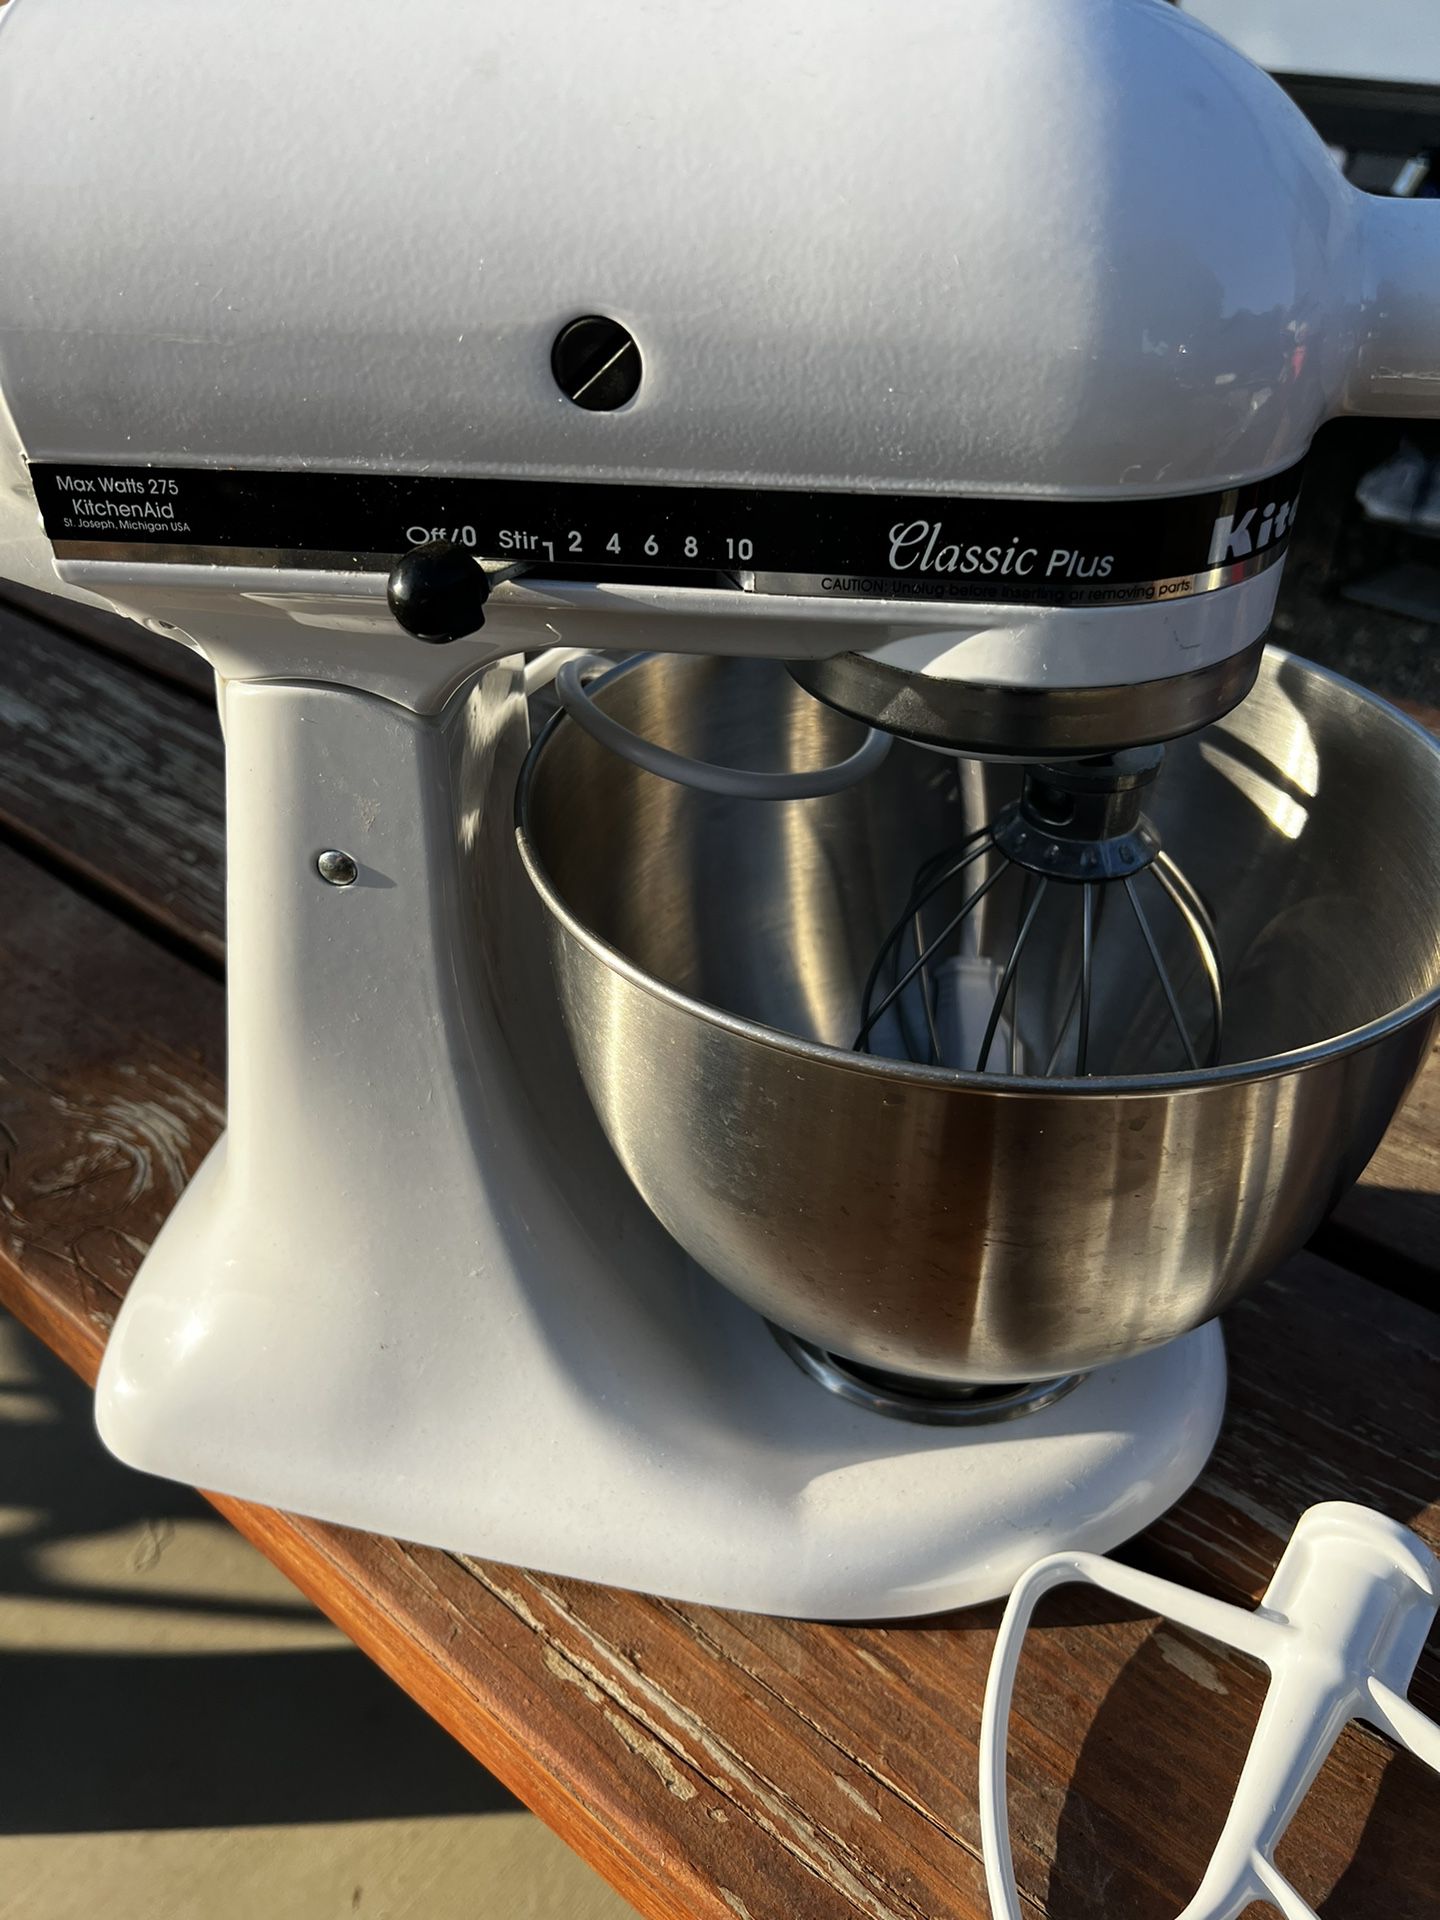 White Kitchen Aid Classic Stand Mixer for Sale in Riverside, CA